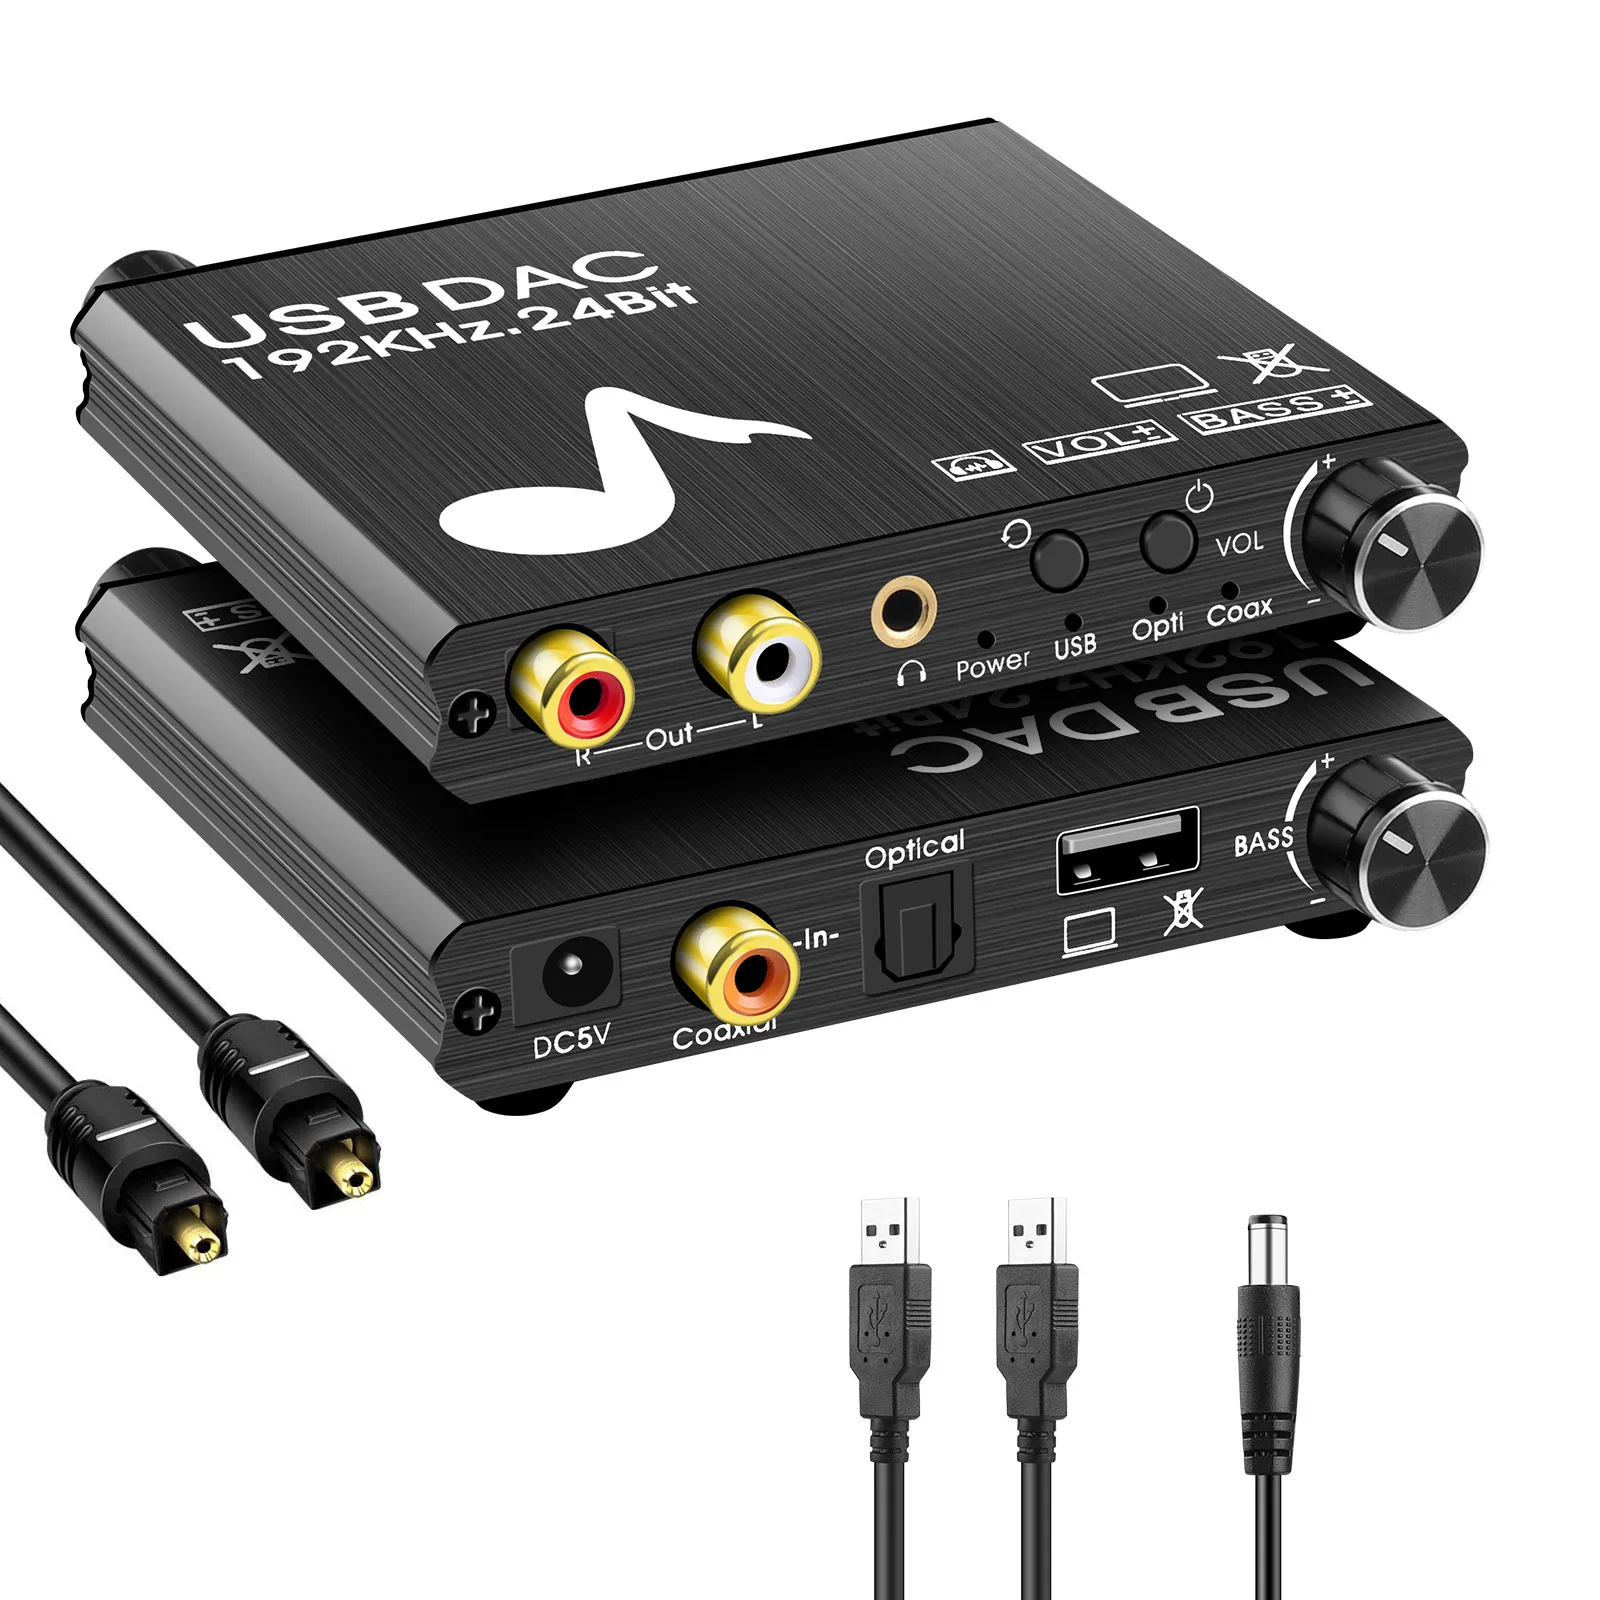 

Laptop USB Sound Card Input Digital to Analog Converter DAC with Bass&Volume Adjustment Optical/Coaxial In to RCA/Headphone Out